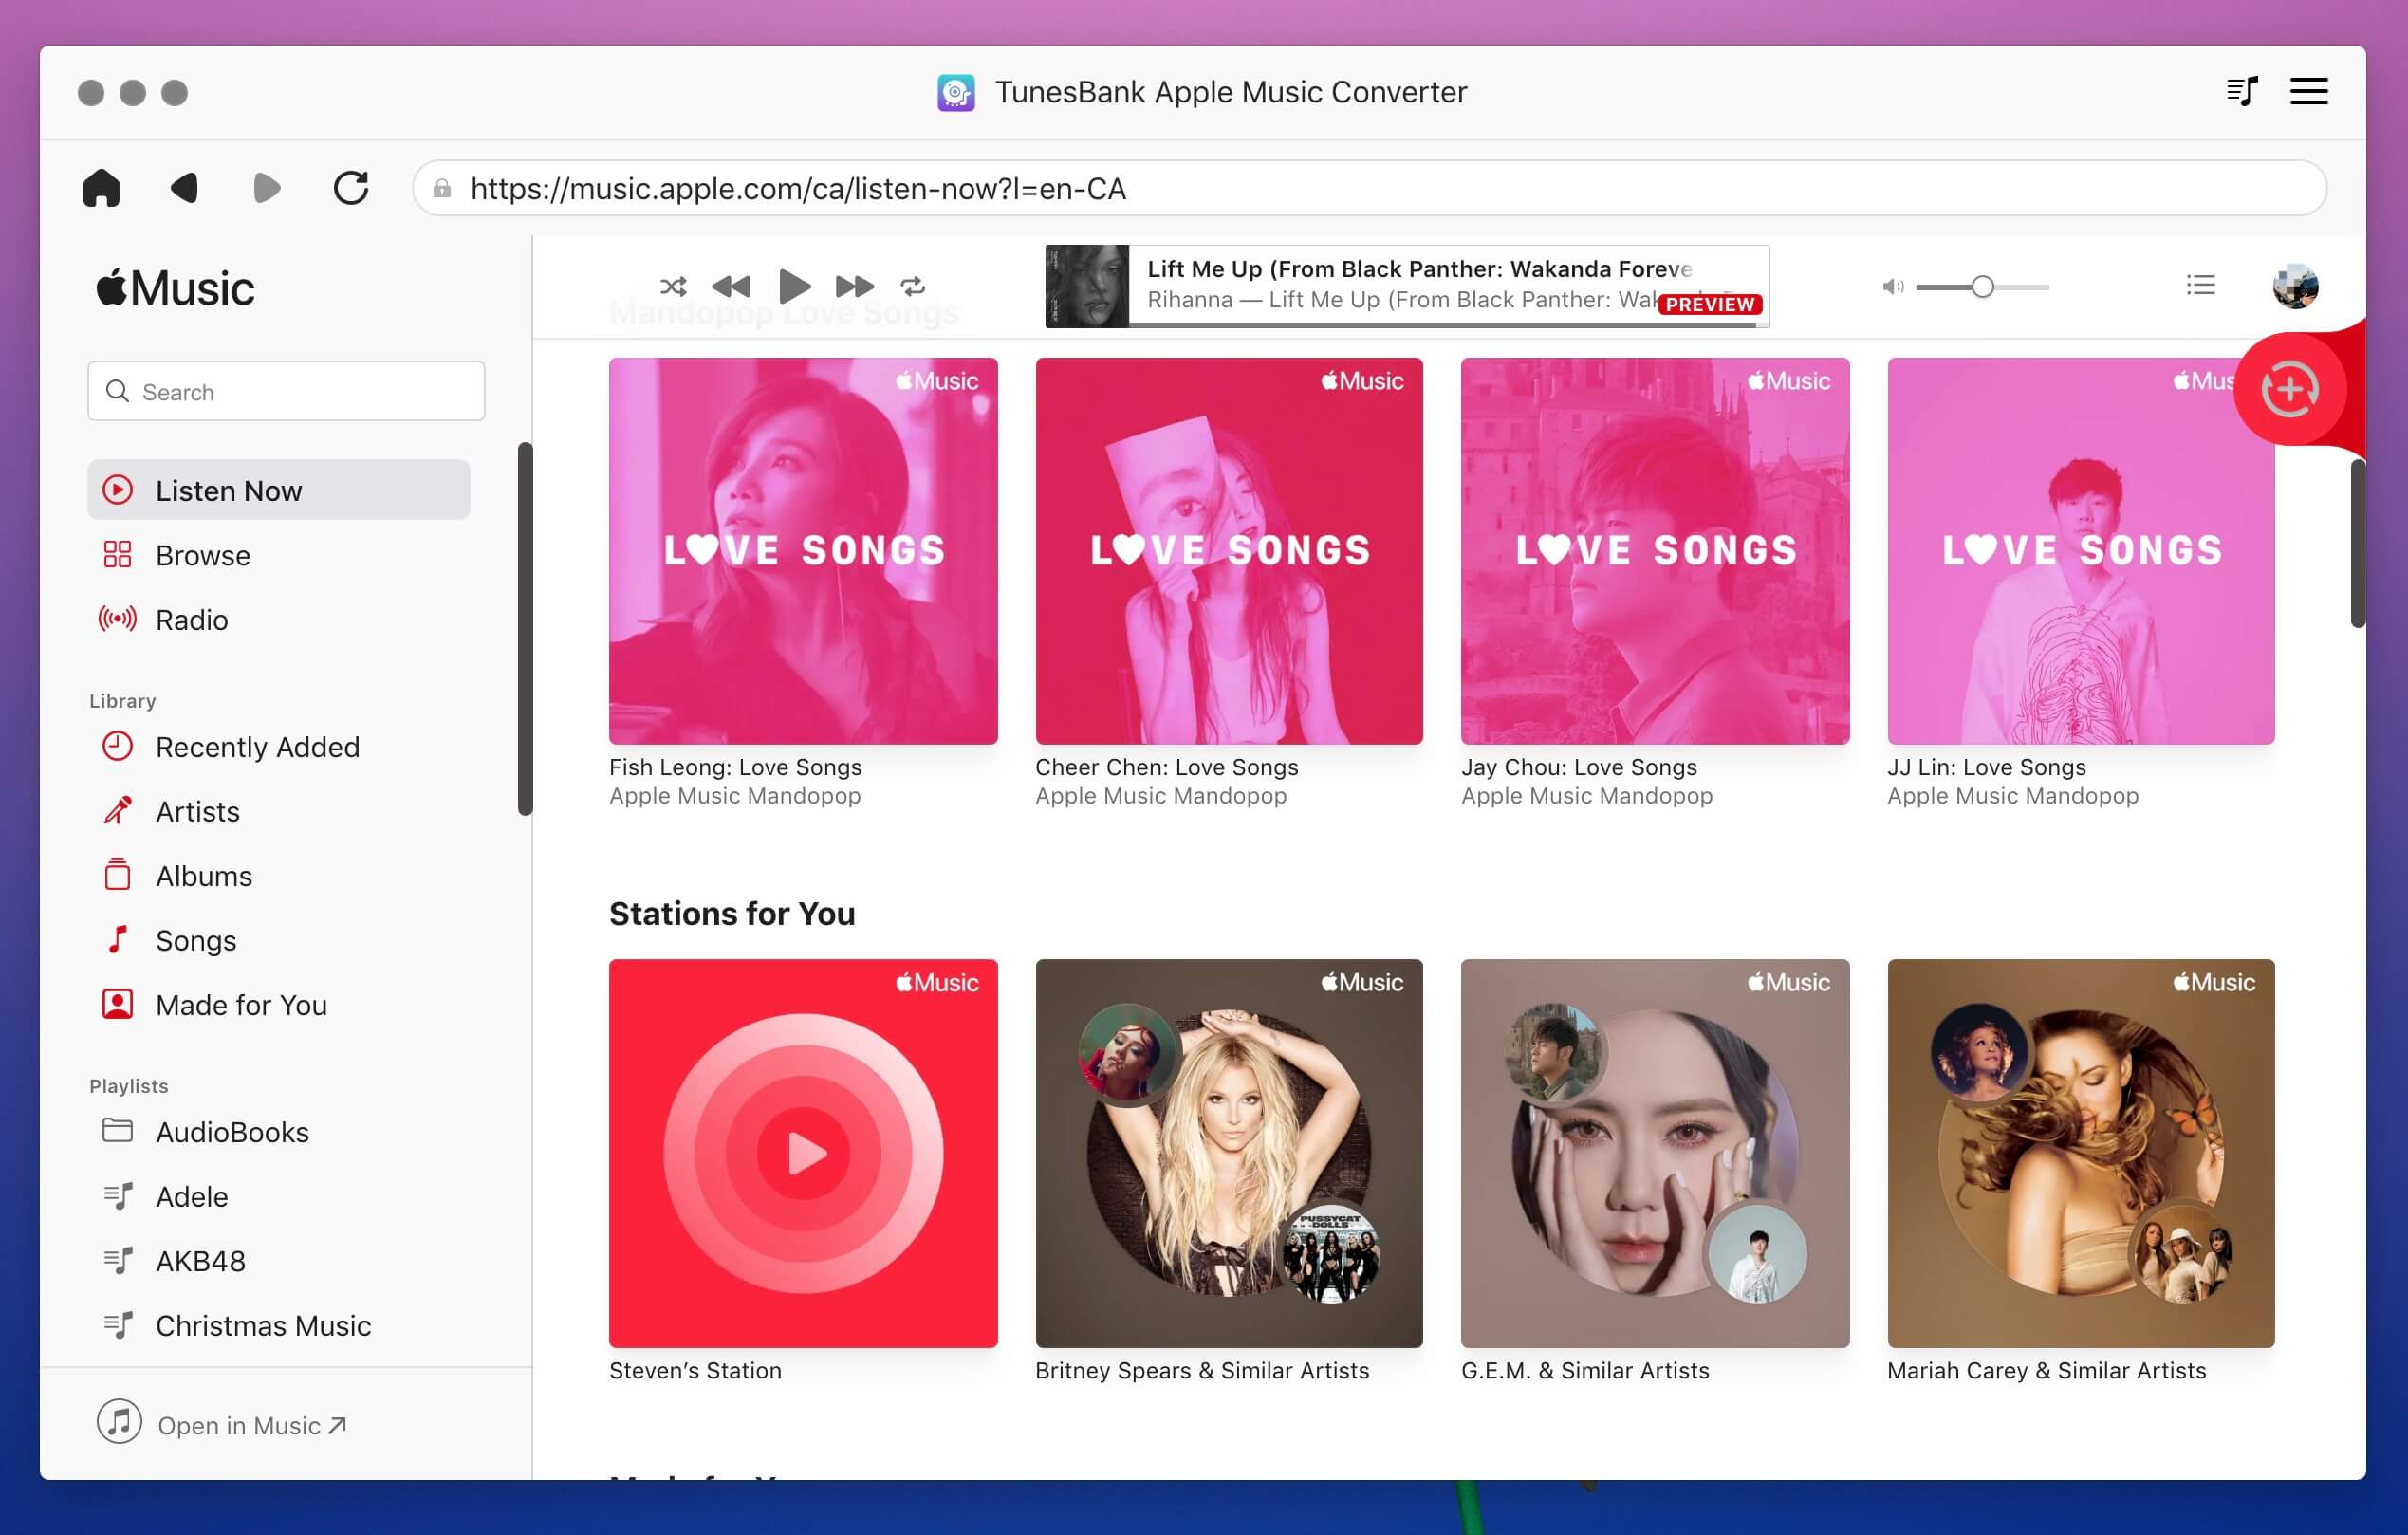 sync apple music songs to tunesbank